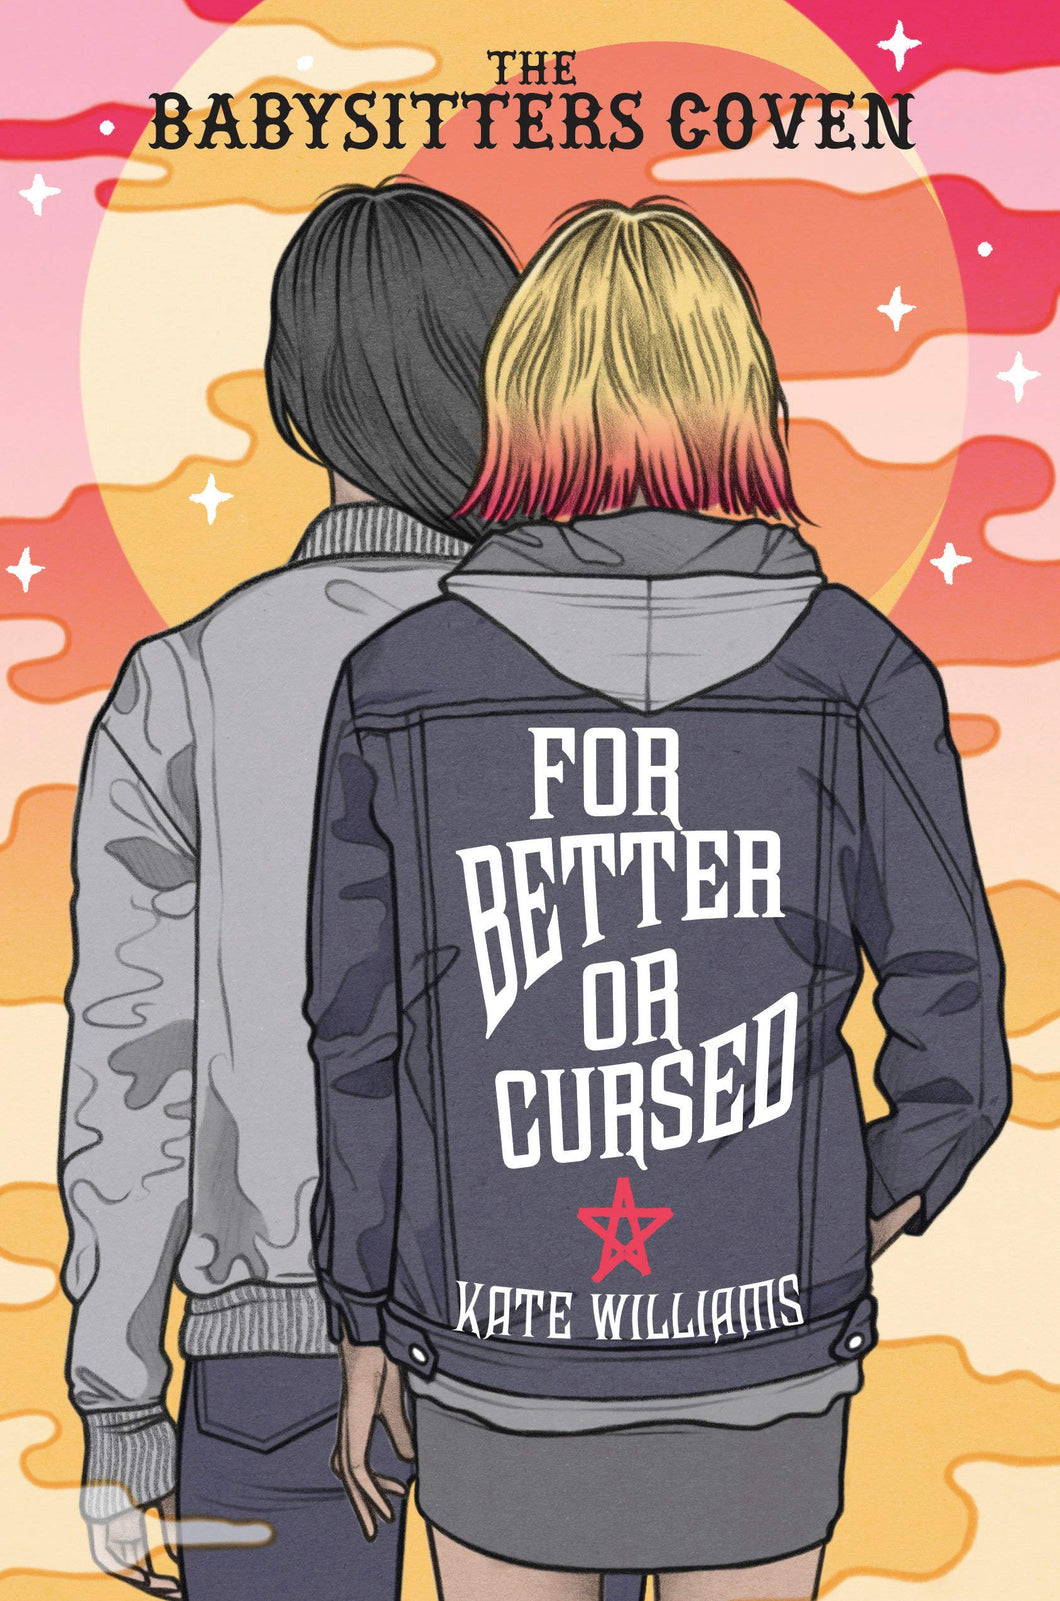 For Better Or Cursed [Kate Williams]